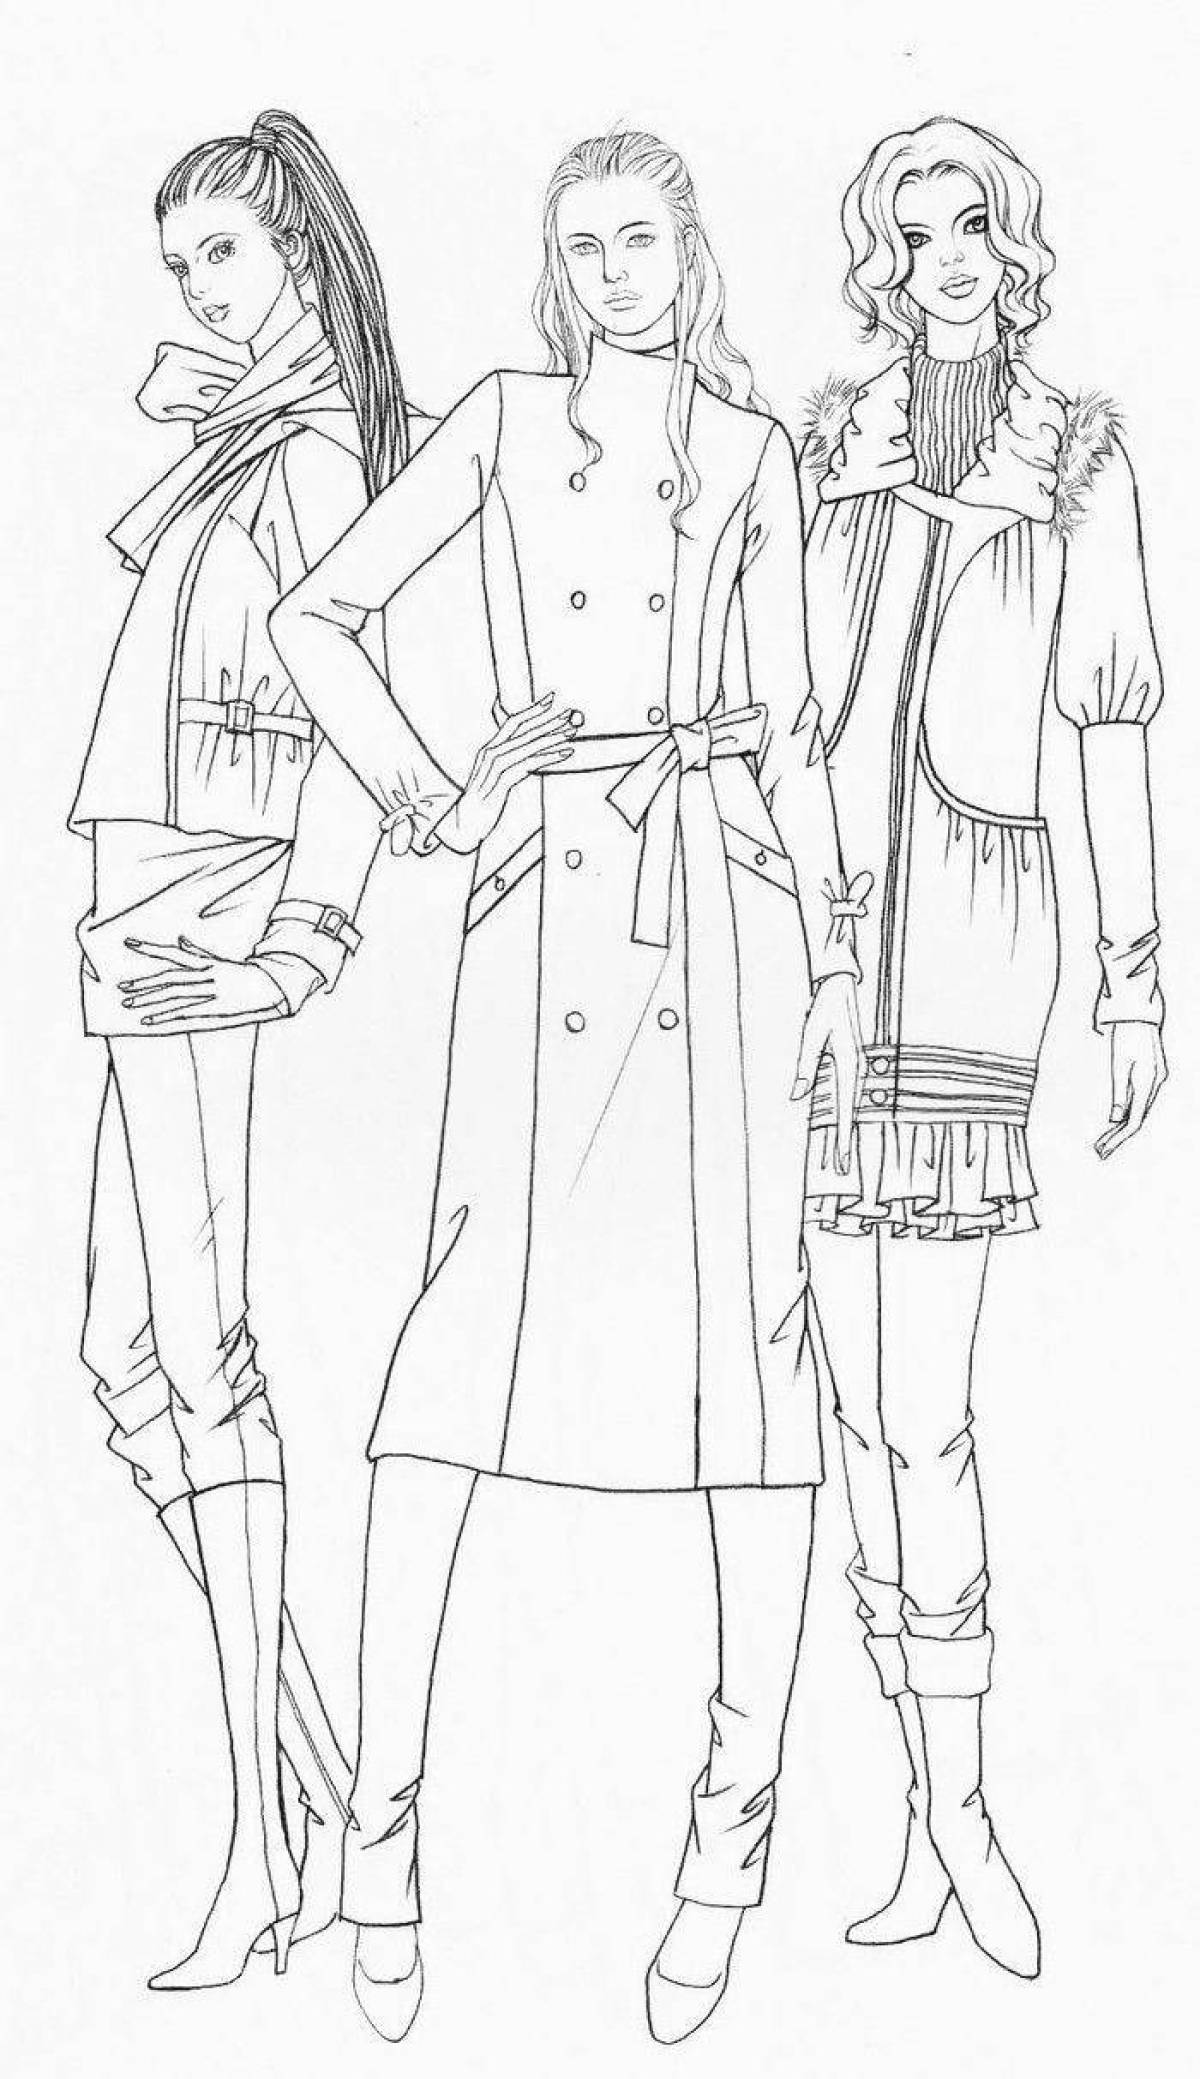 Coloring page with colorful clothing design